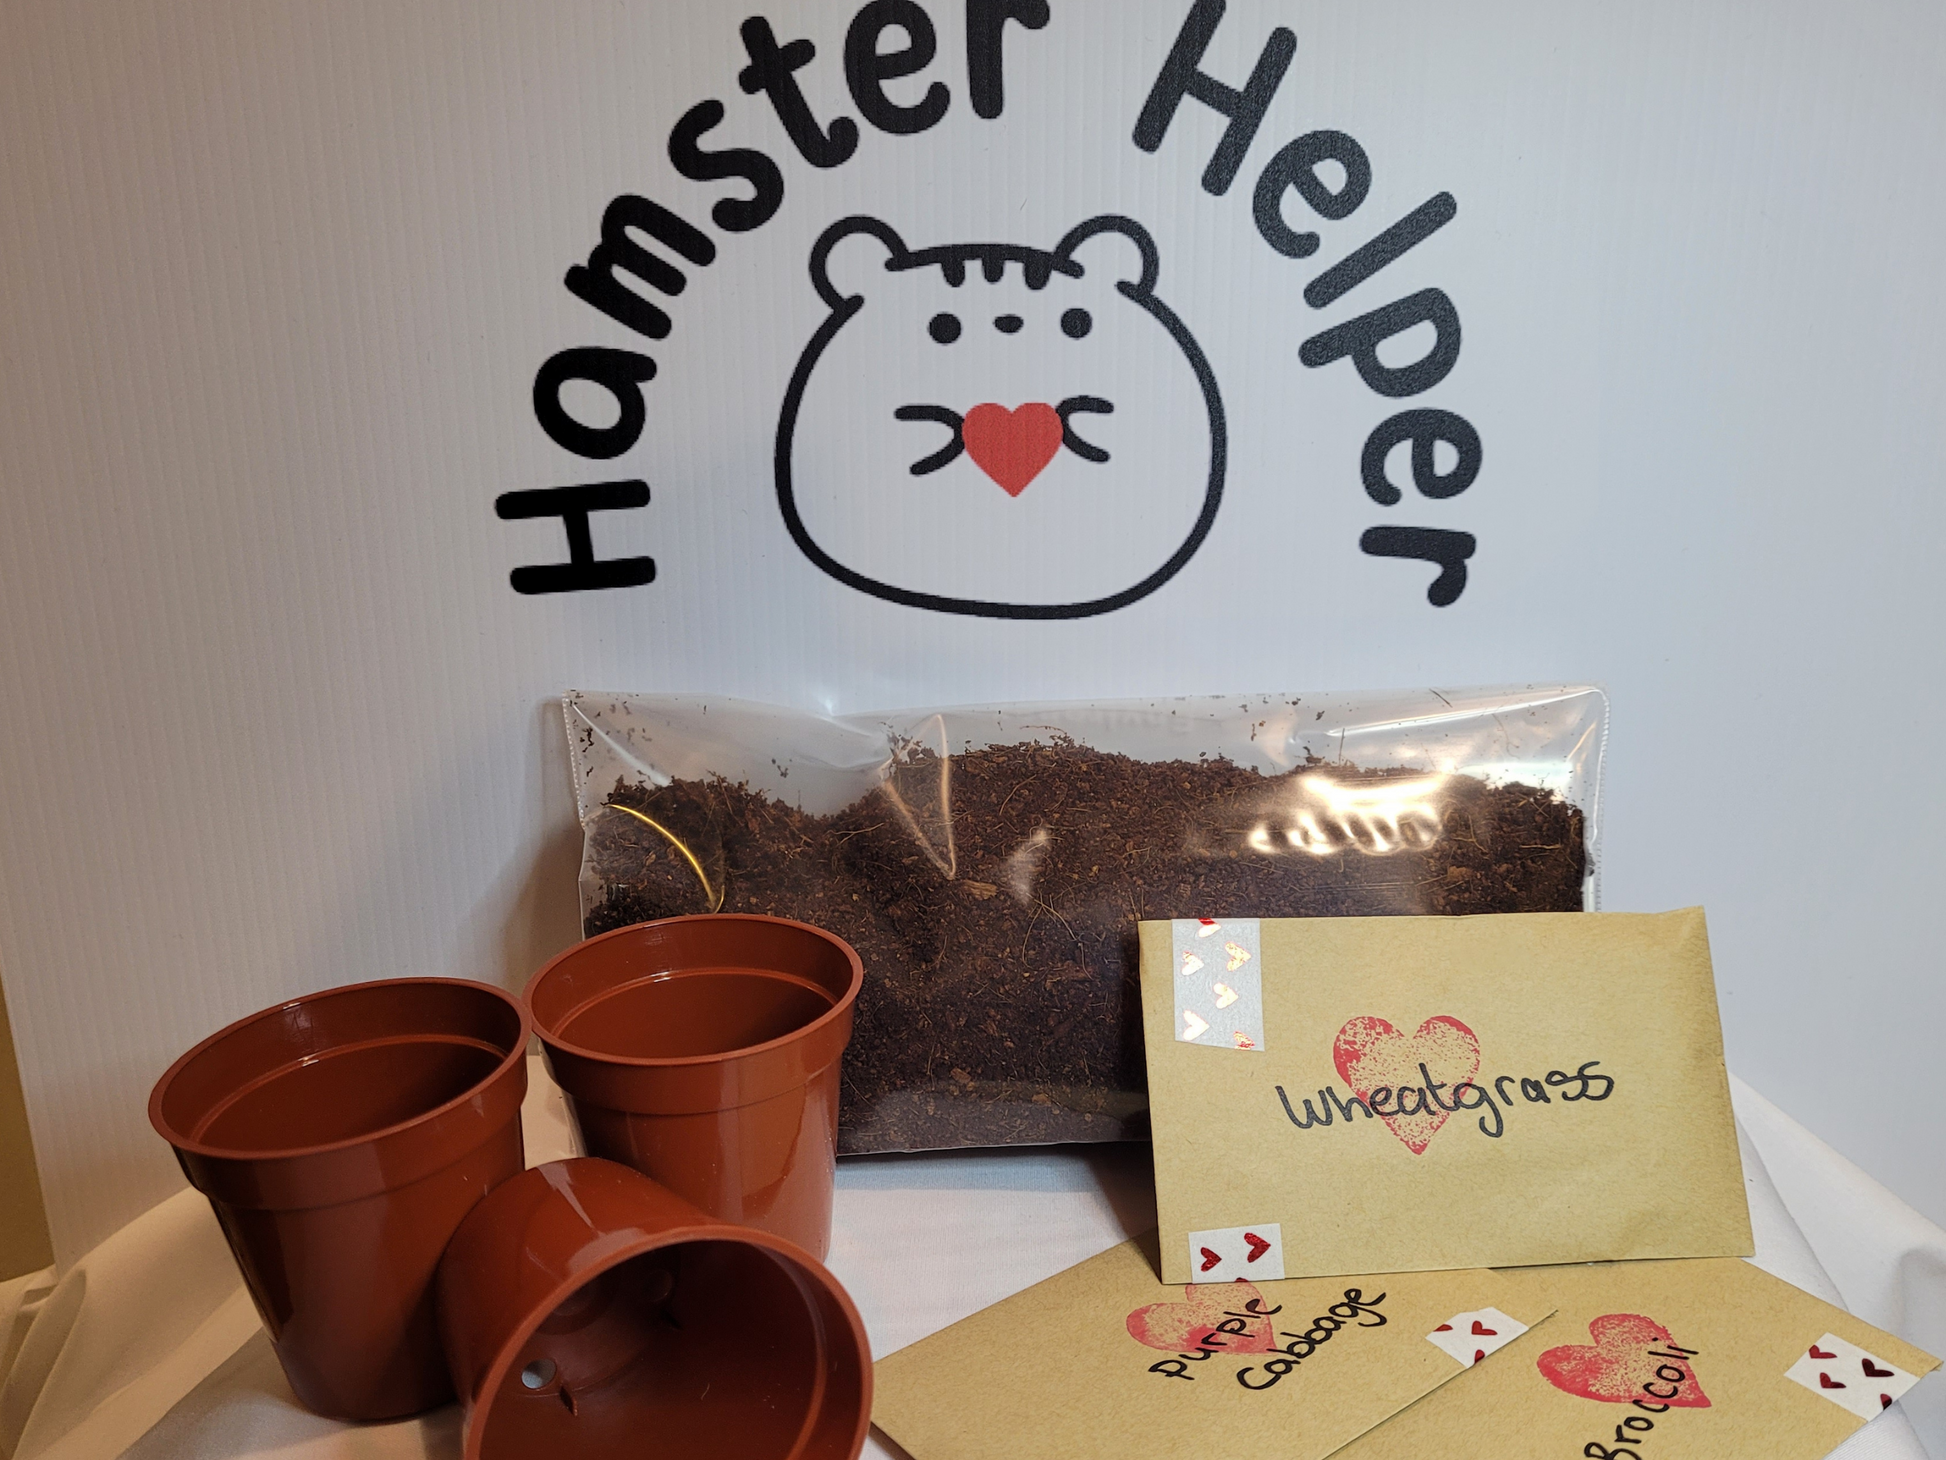 A kit for growing hamster microgreens containing three plastic plant pots, three packs of seeds and some hamster safe soil pictured in front of the Hamster Helper logo